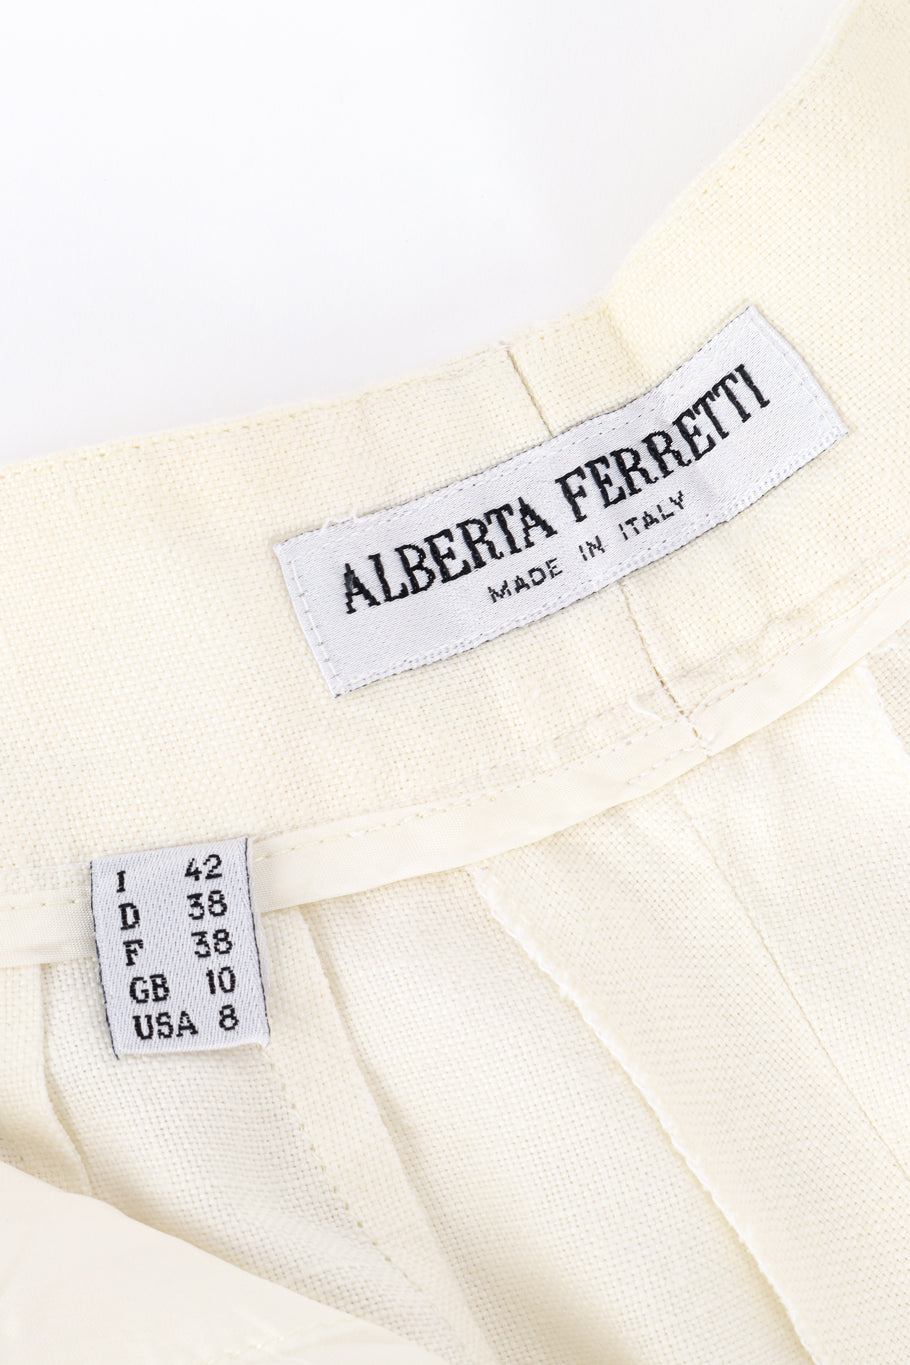 Vintage Alberta Ferretti woven linen embroidered cream mock tunic vest and pant twin set  close up of the makers label inside the trousers with size guide@Recess LA